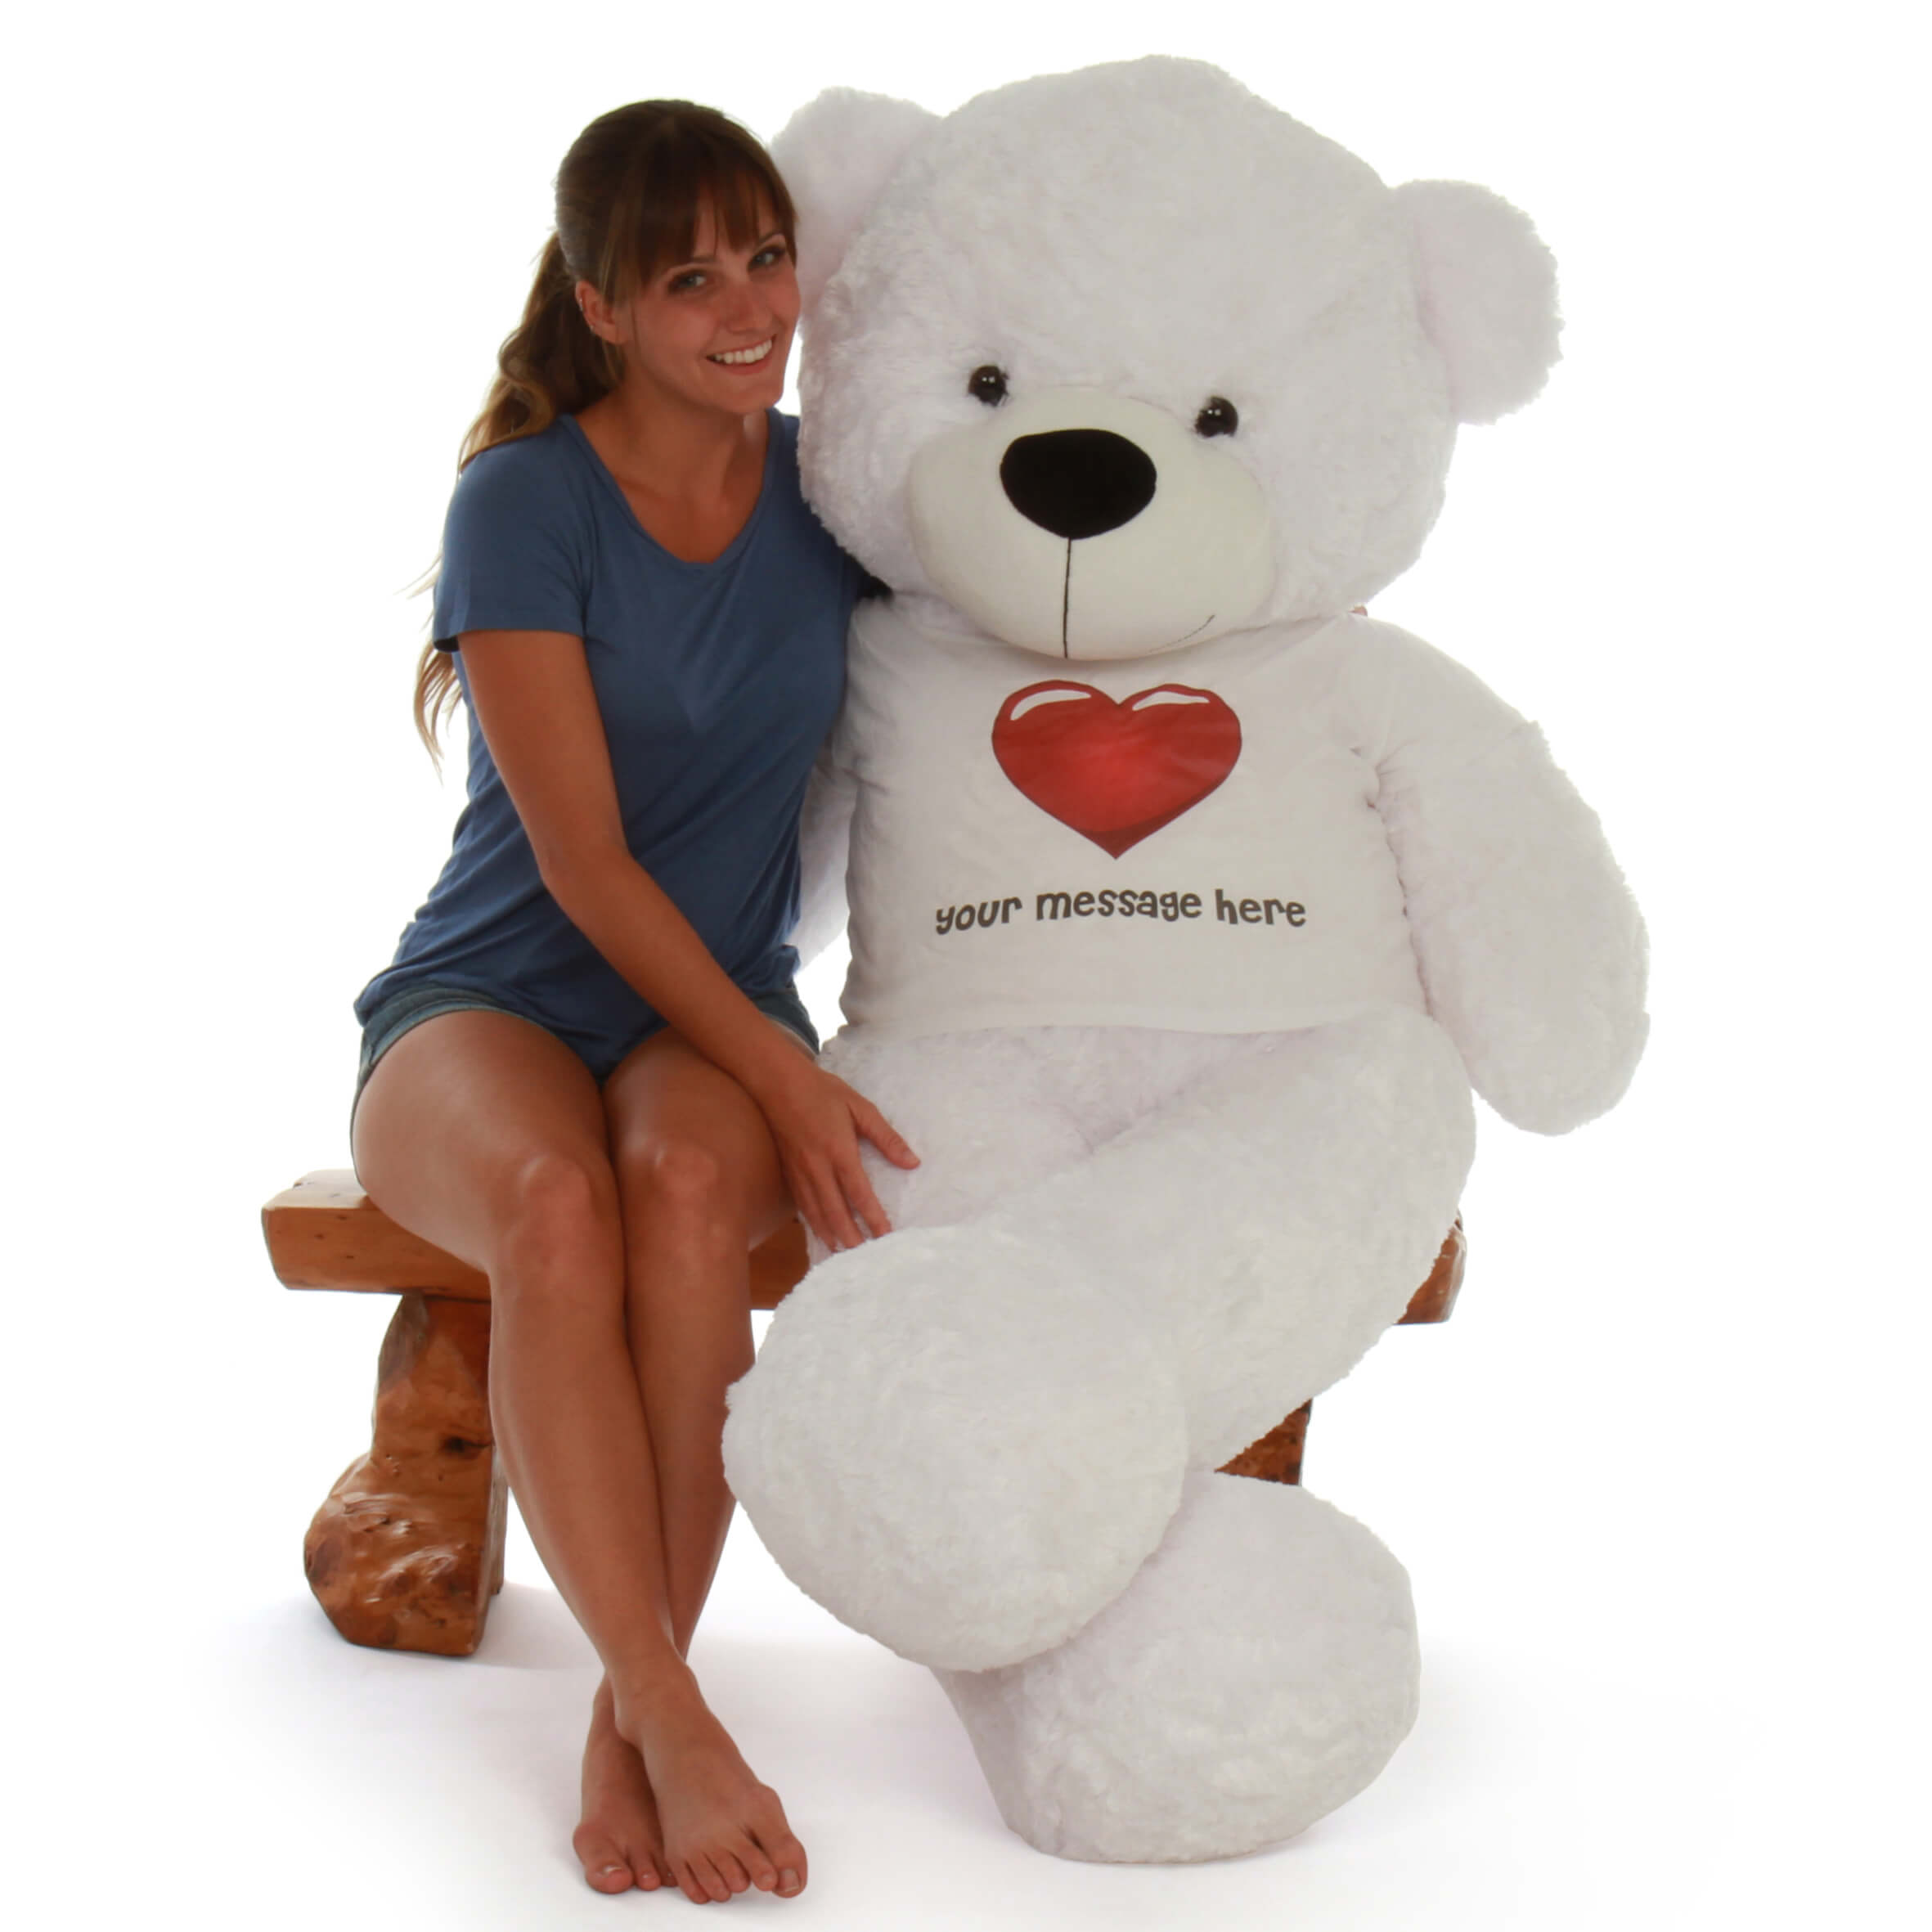 5ft-life-size-personalized-white-teddy-bear-coco-cuddles-in-red-heart-shirt-1.jpg